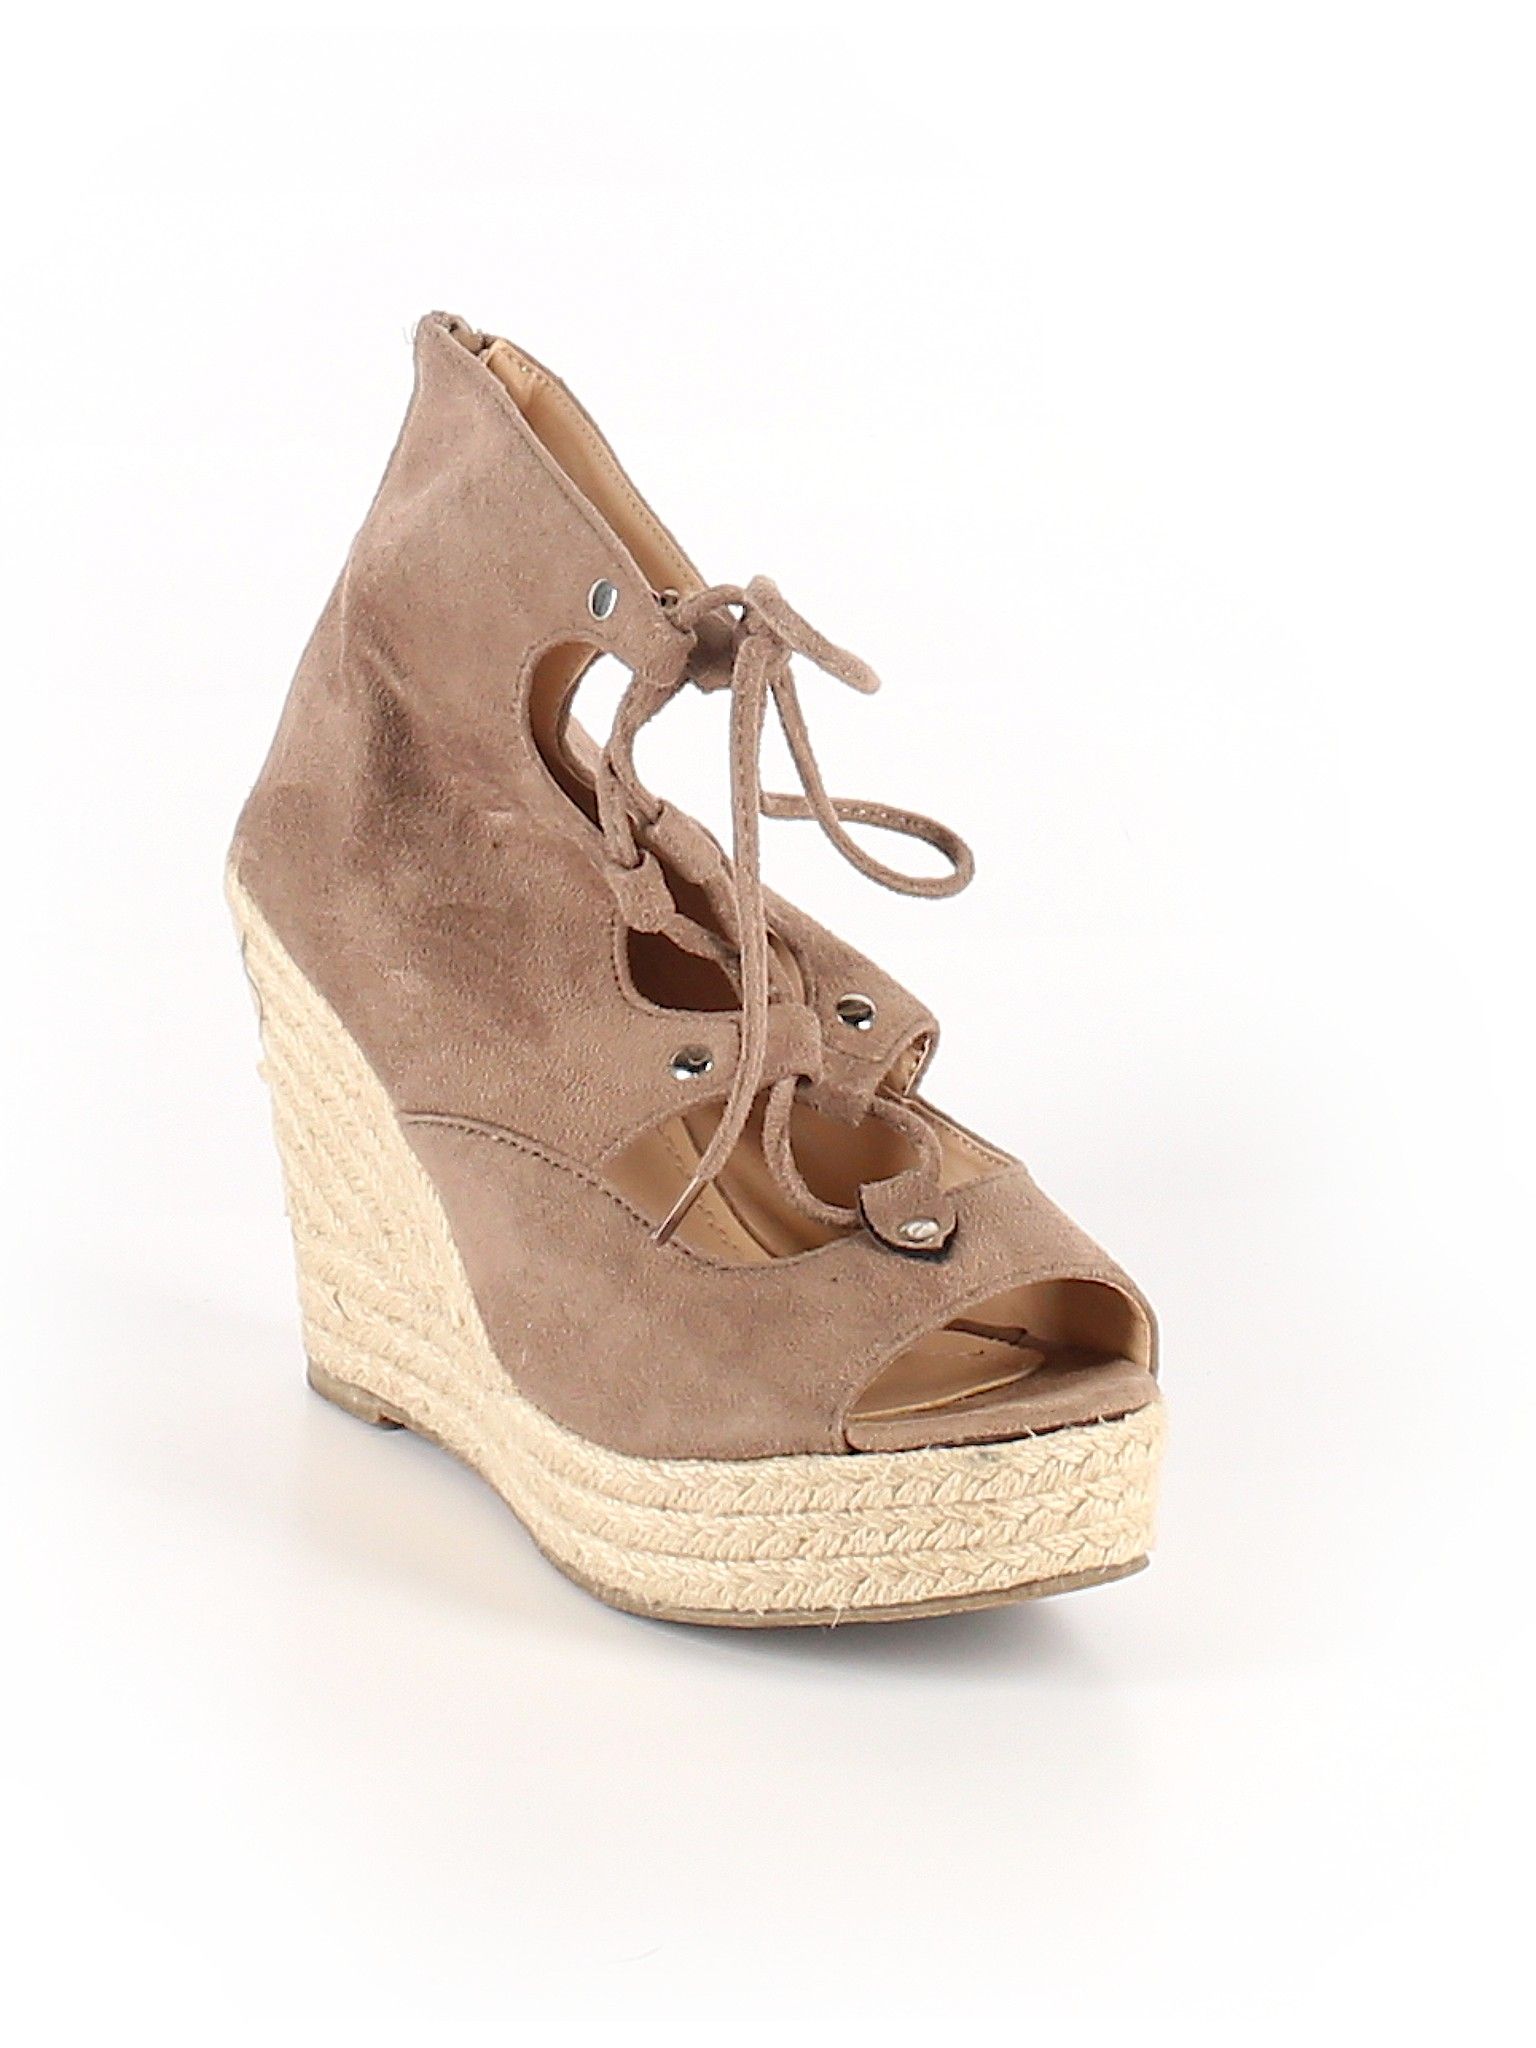 Chase & Chloe Wedges Size 8 1/2: Brown Women's Clothing - 40975427 | thredUP